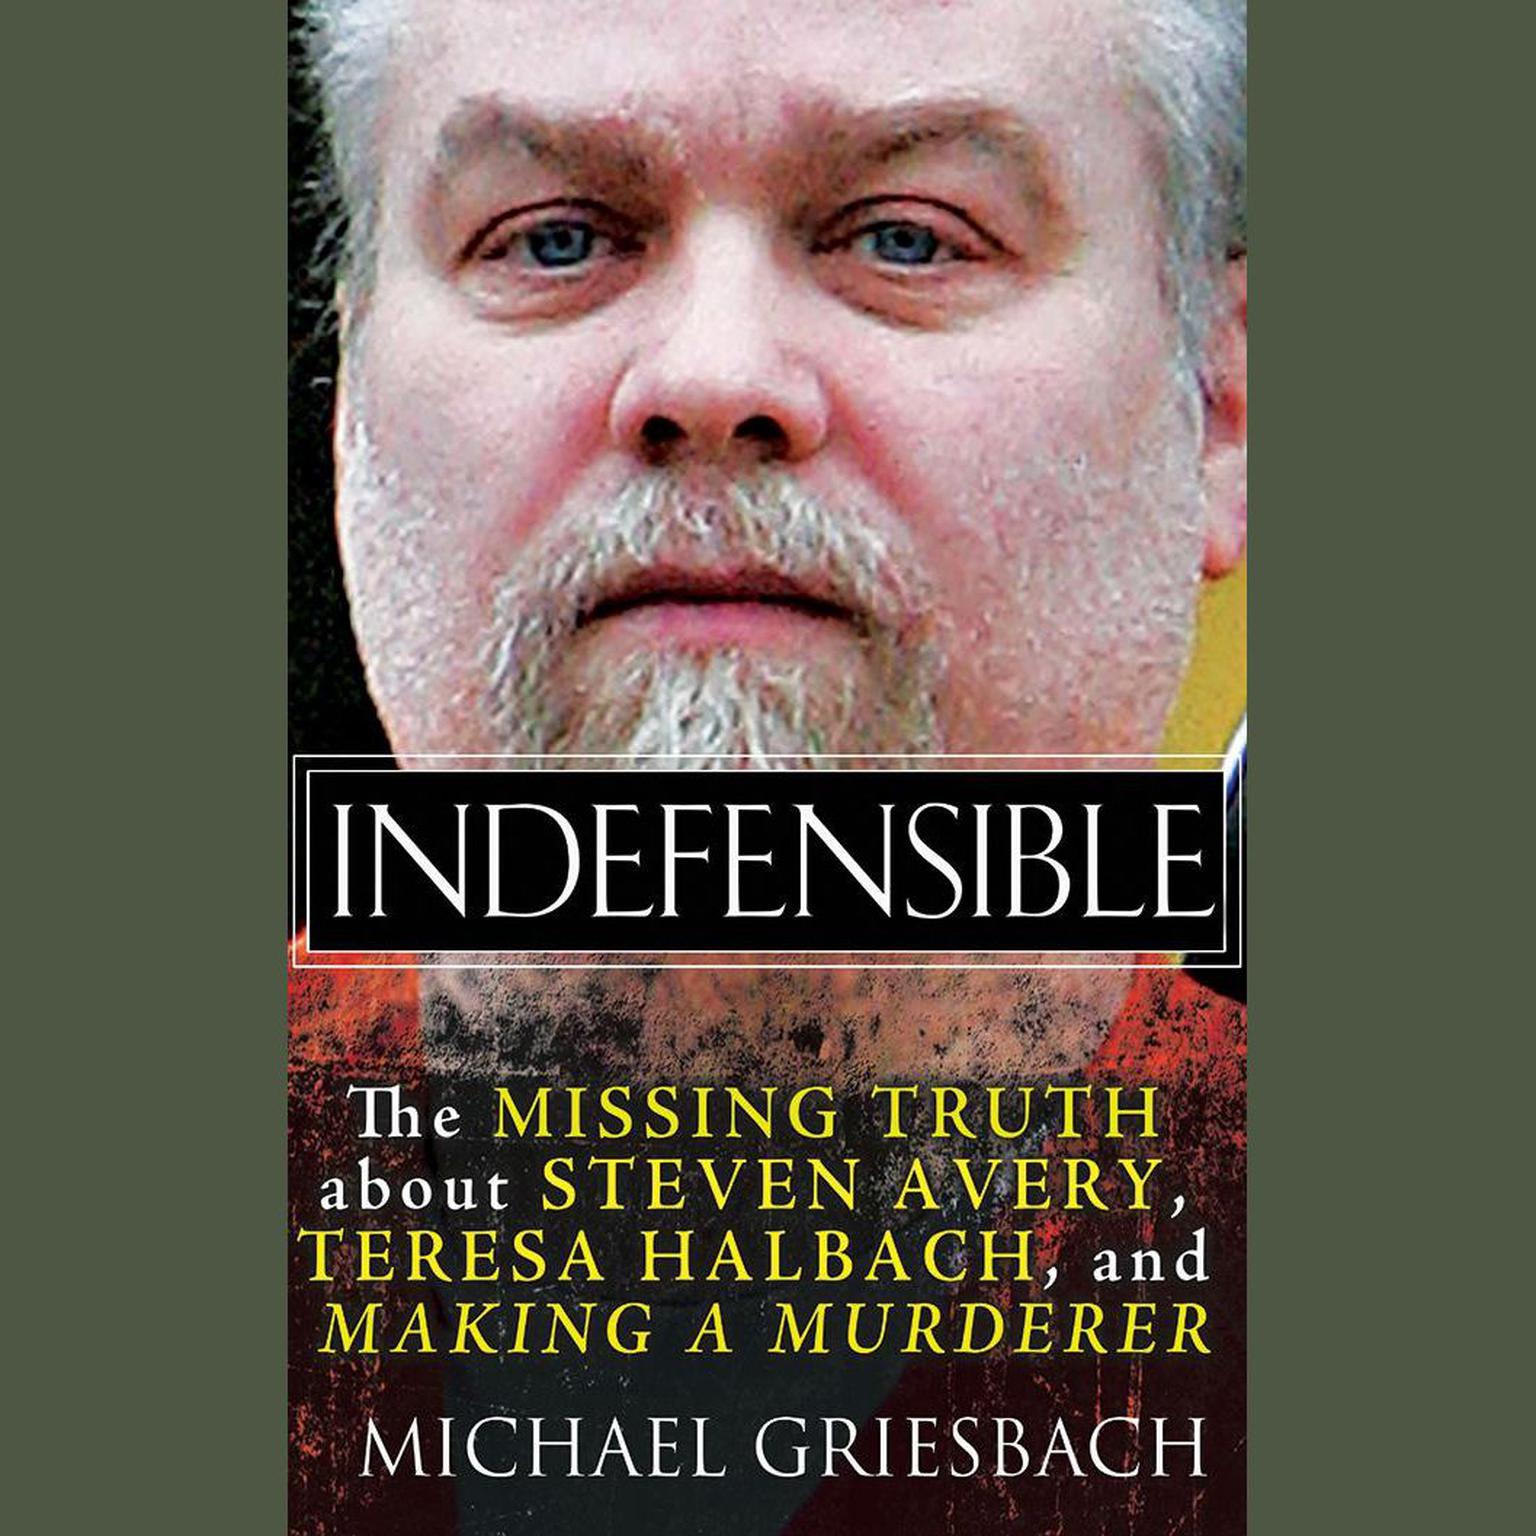 Indefensible: The Missing Truth about Steven Avery, Teresa Halbach, and Making a Murderer Audiobook, by Michael Griesbach